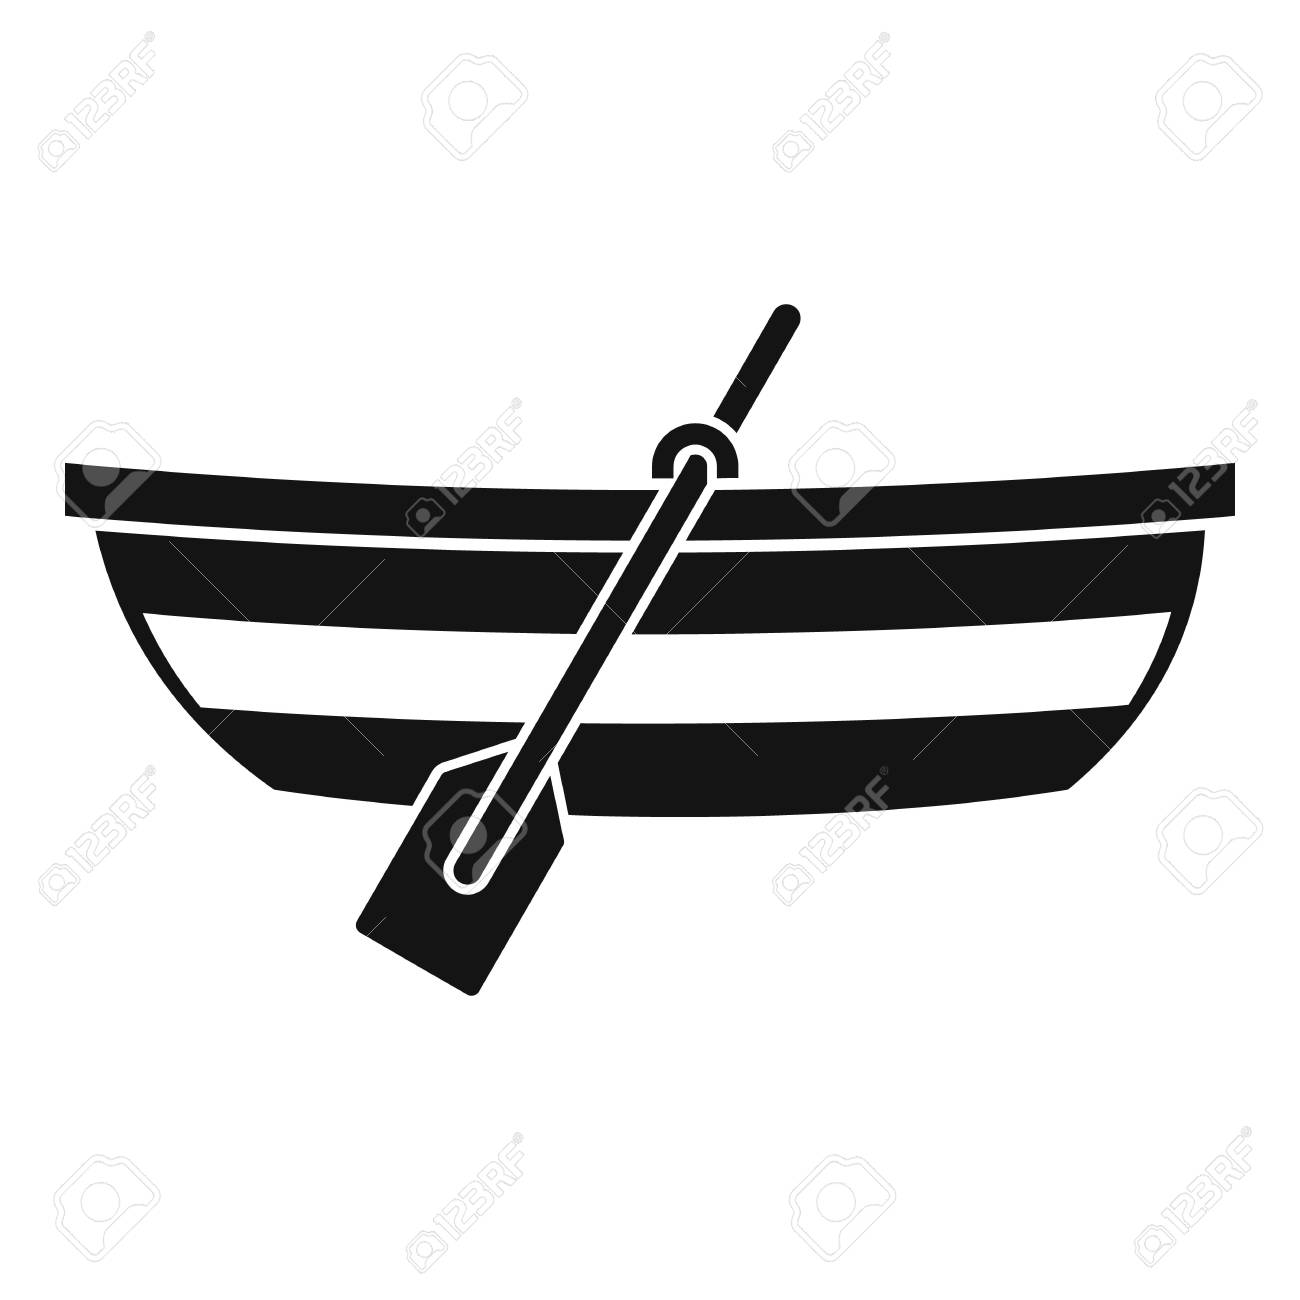 Boats clipart simple. Fishing boat free on